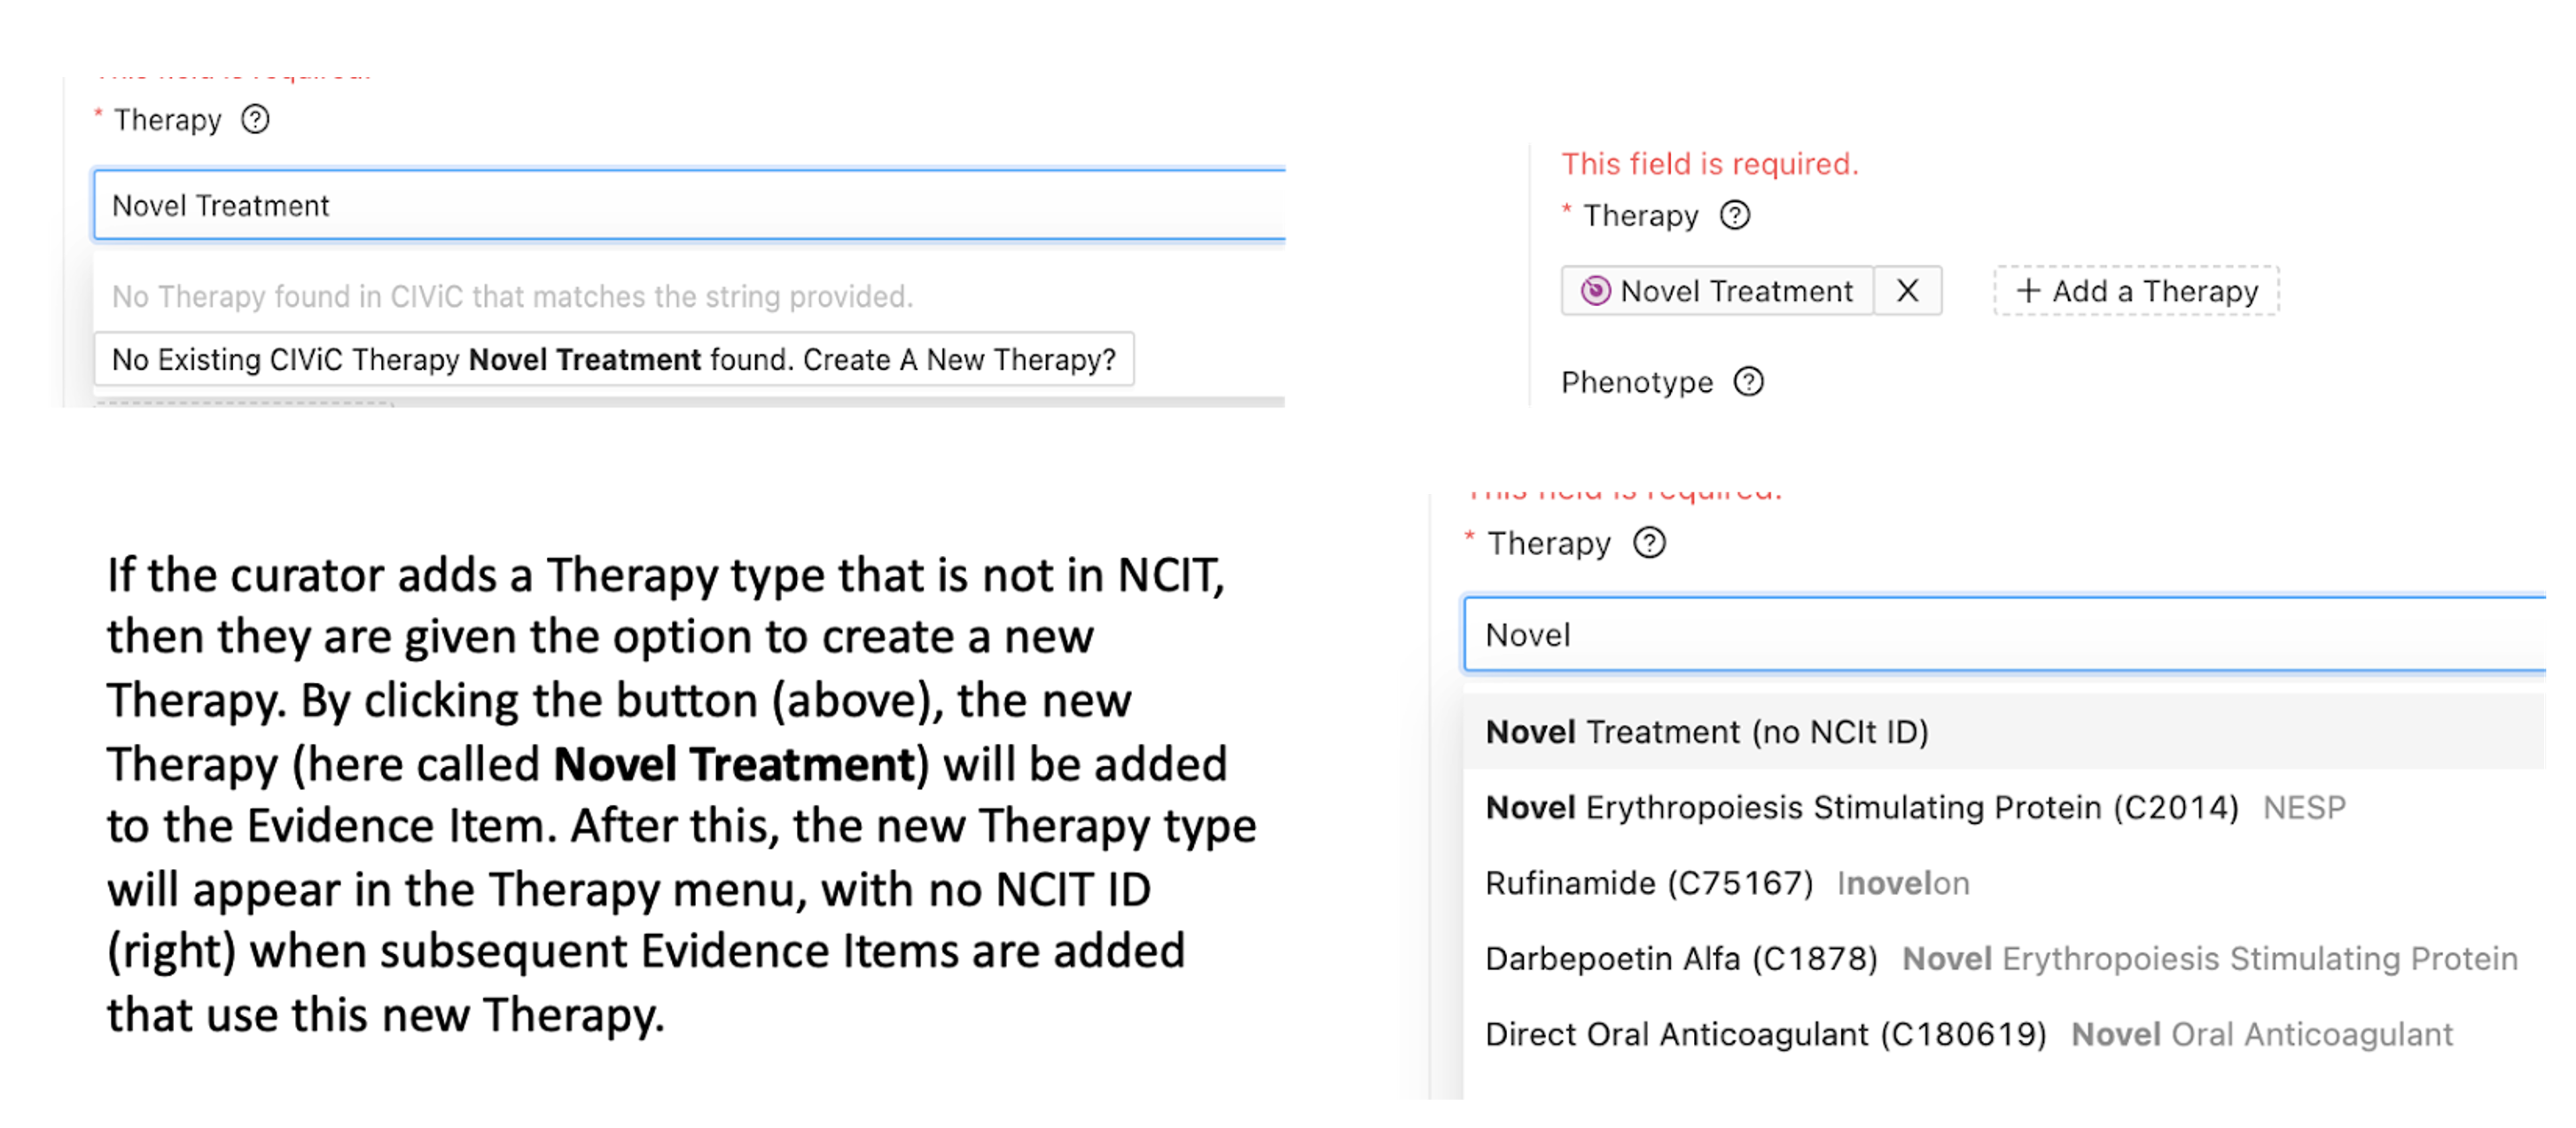 Overview of adding a Therapy not present in NCIT